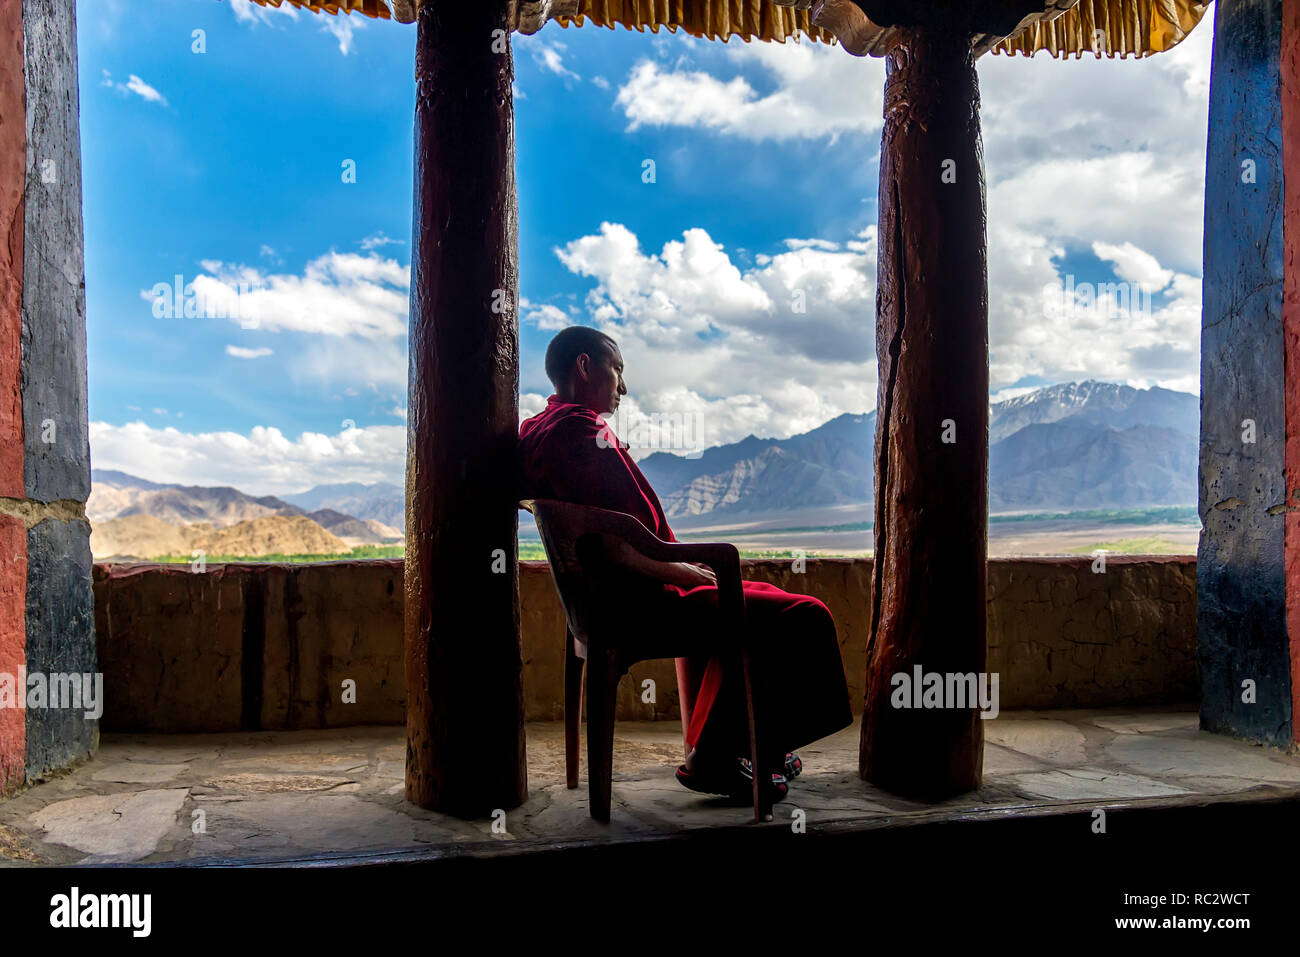 Thikse, India - August 16, 2015: A buddhist monk with red robe on a chair resting in Thikse gompa (monastery) Stock Photo